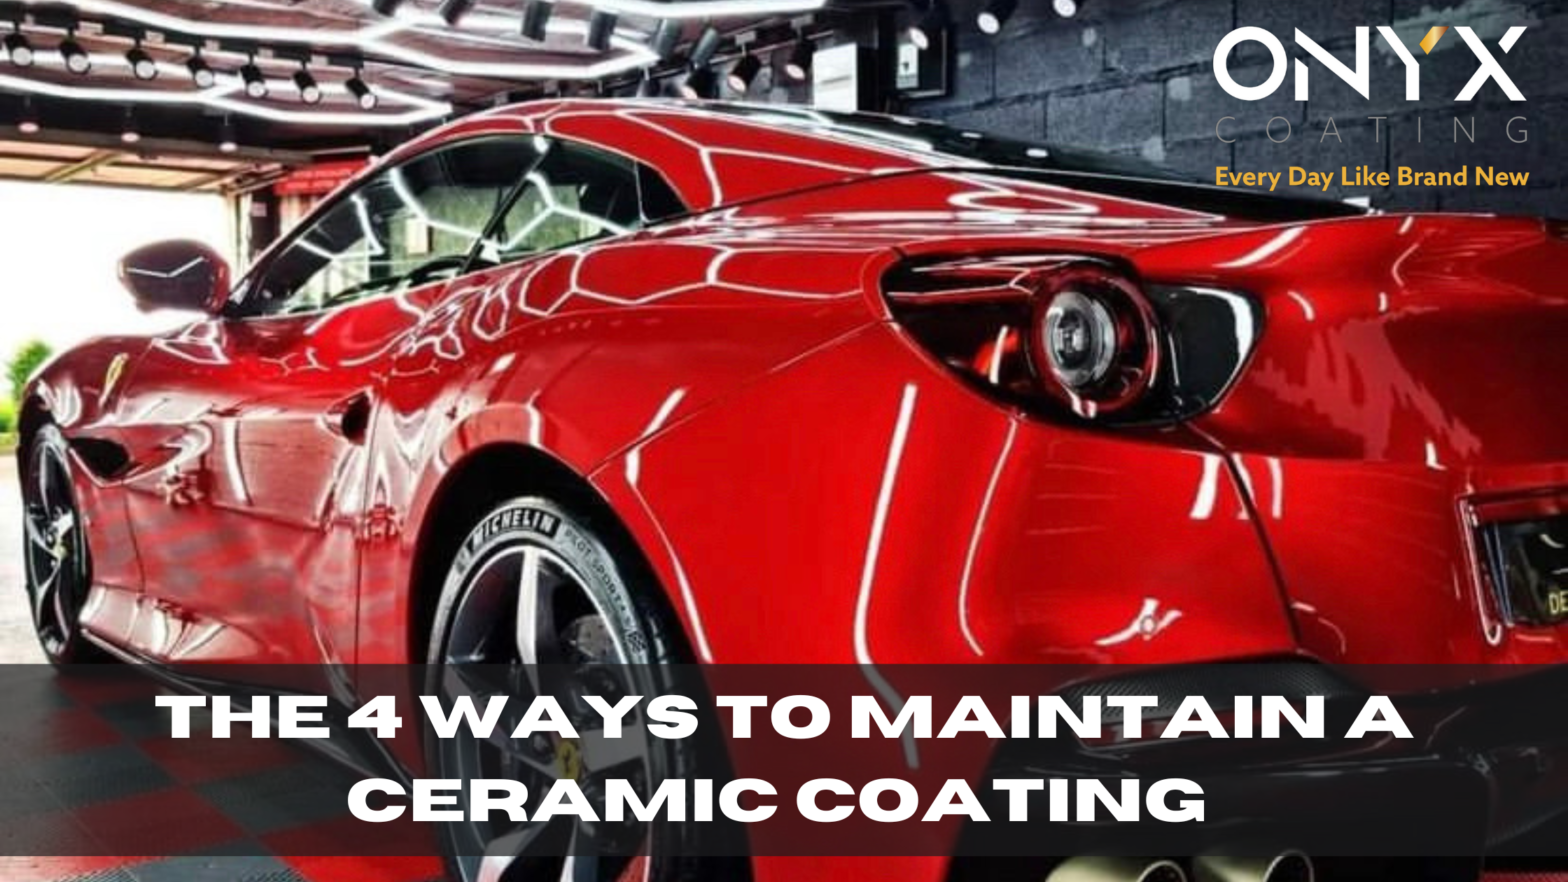 The 4 ways to maintain a ceramic coating